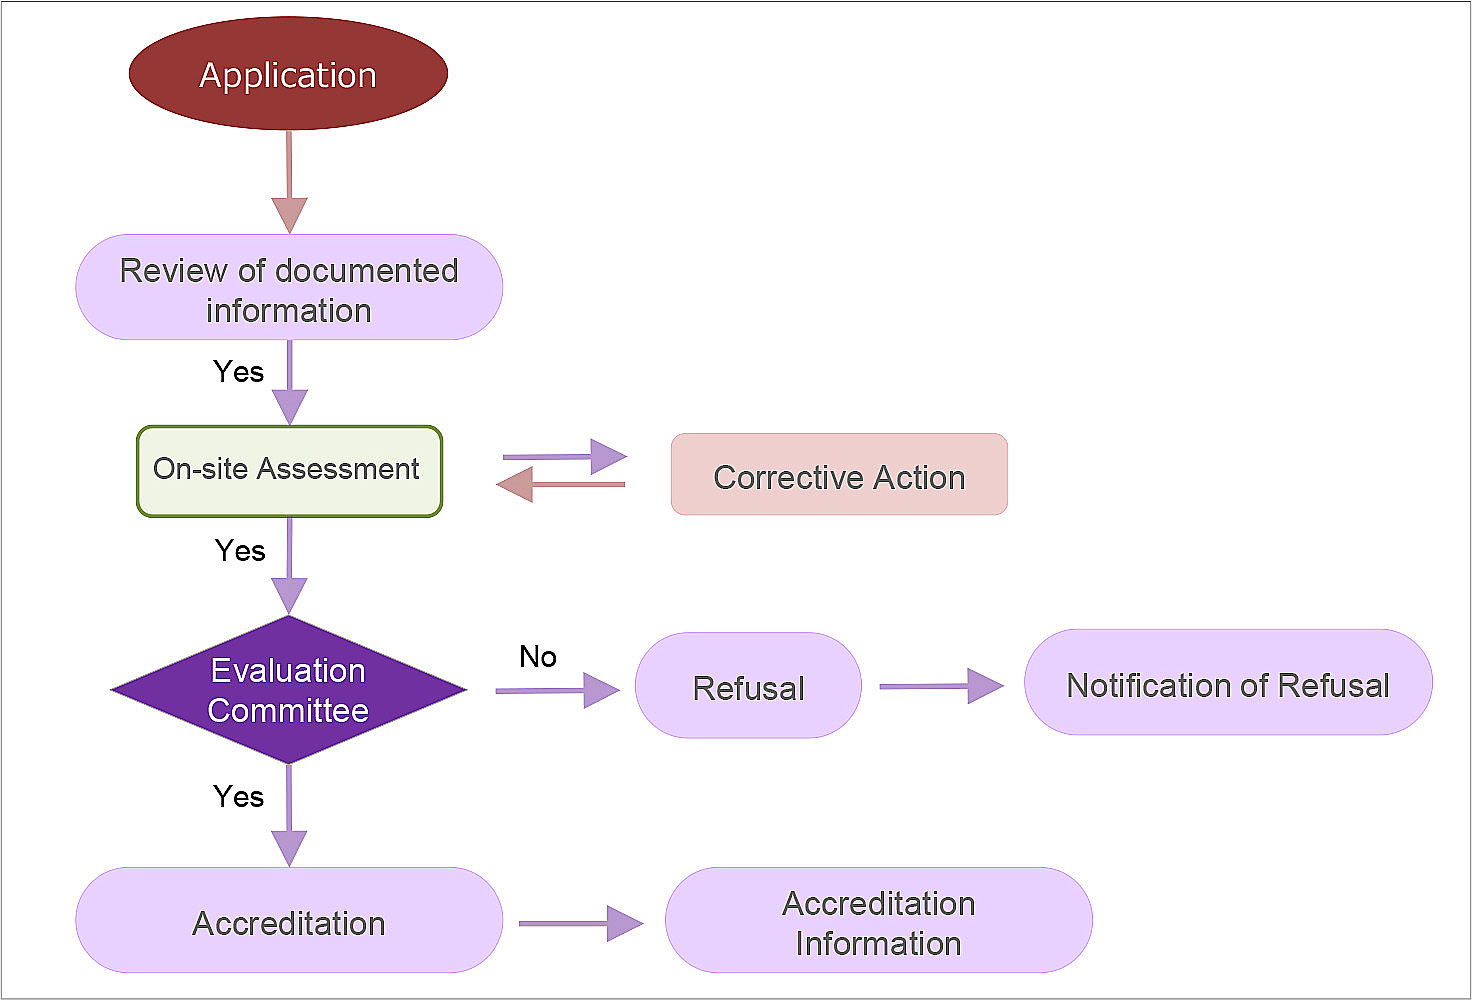 Outline of Accreditation Process